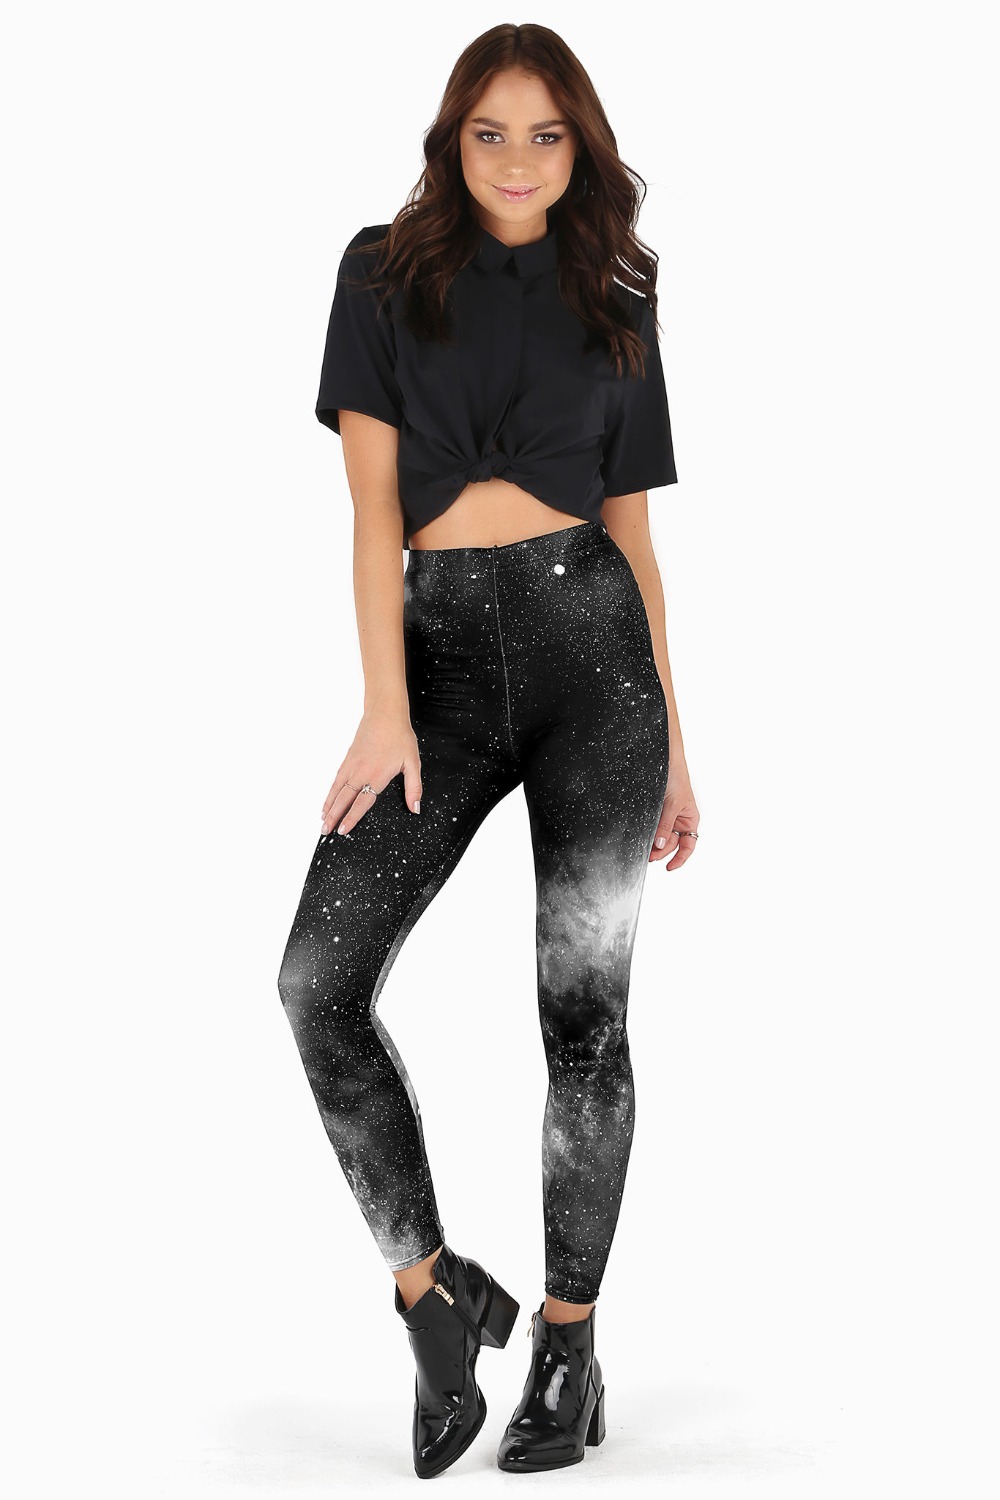 Black Milk Clothing - You know we never skip booty day 😜 We just added  these outta this world leggings to our SALE tab! Shop the Galaxy Supernova  Legs on sale here: